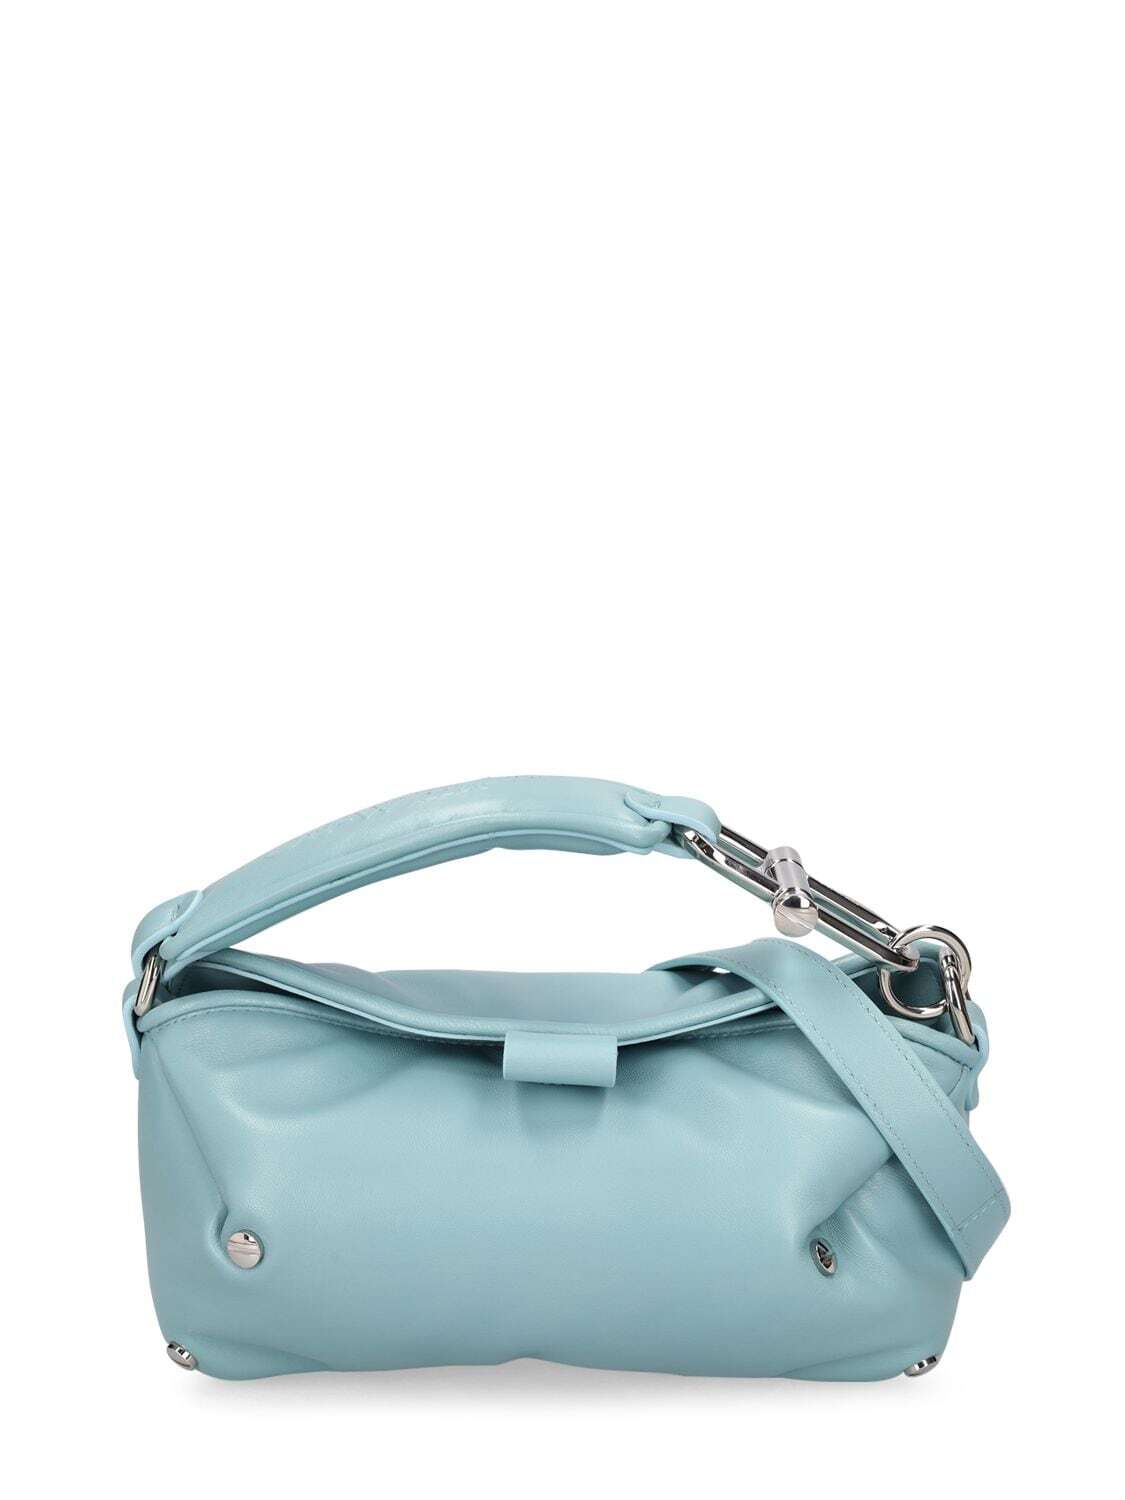 OFF-WHITE Small San Diego Shoulder Bag in blue